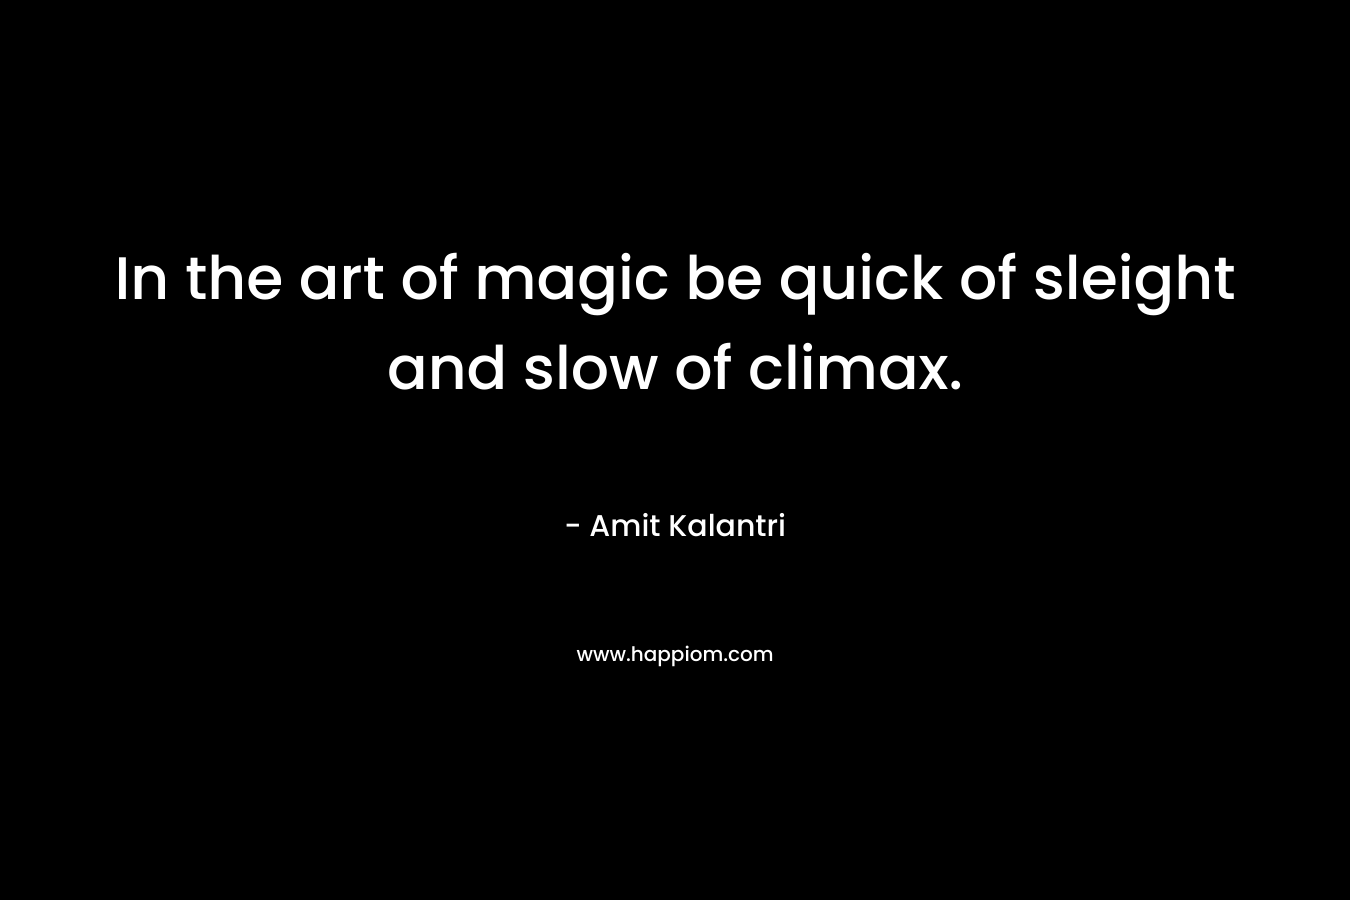 In the art of magic be quick of sleight and slow of climax.